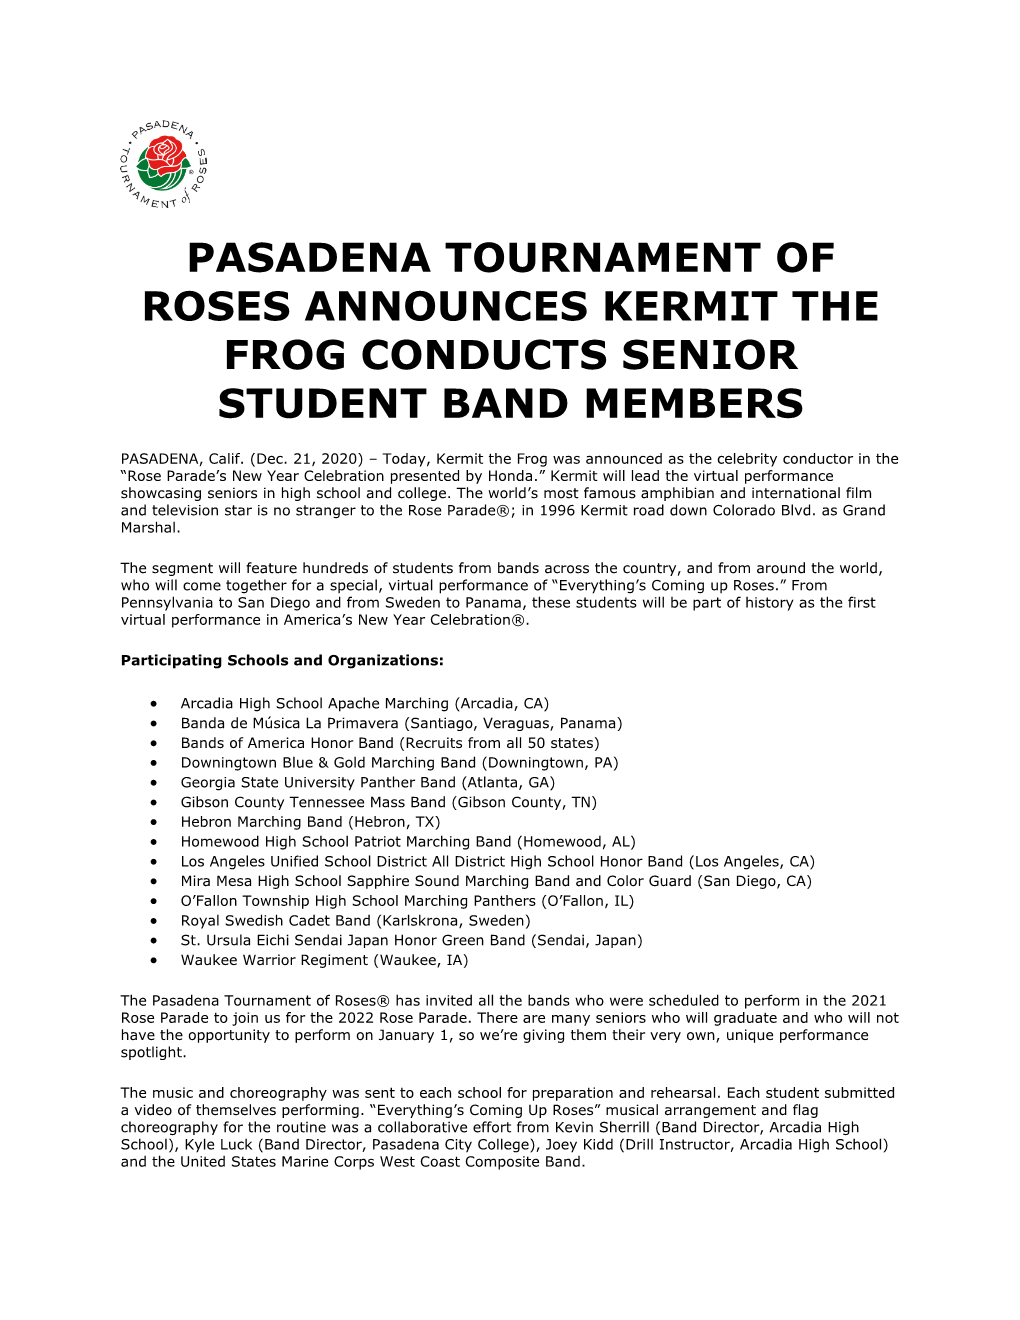 Pasadena Tournament of Roses Announces Kermit the Frog Conducts Senior Student Band Members